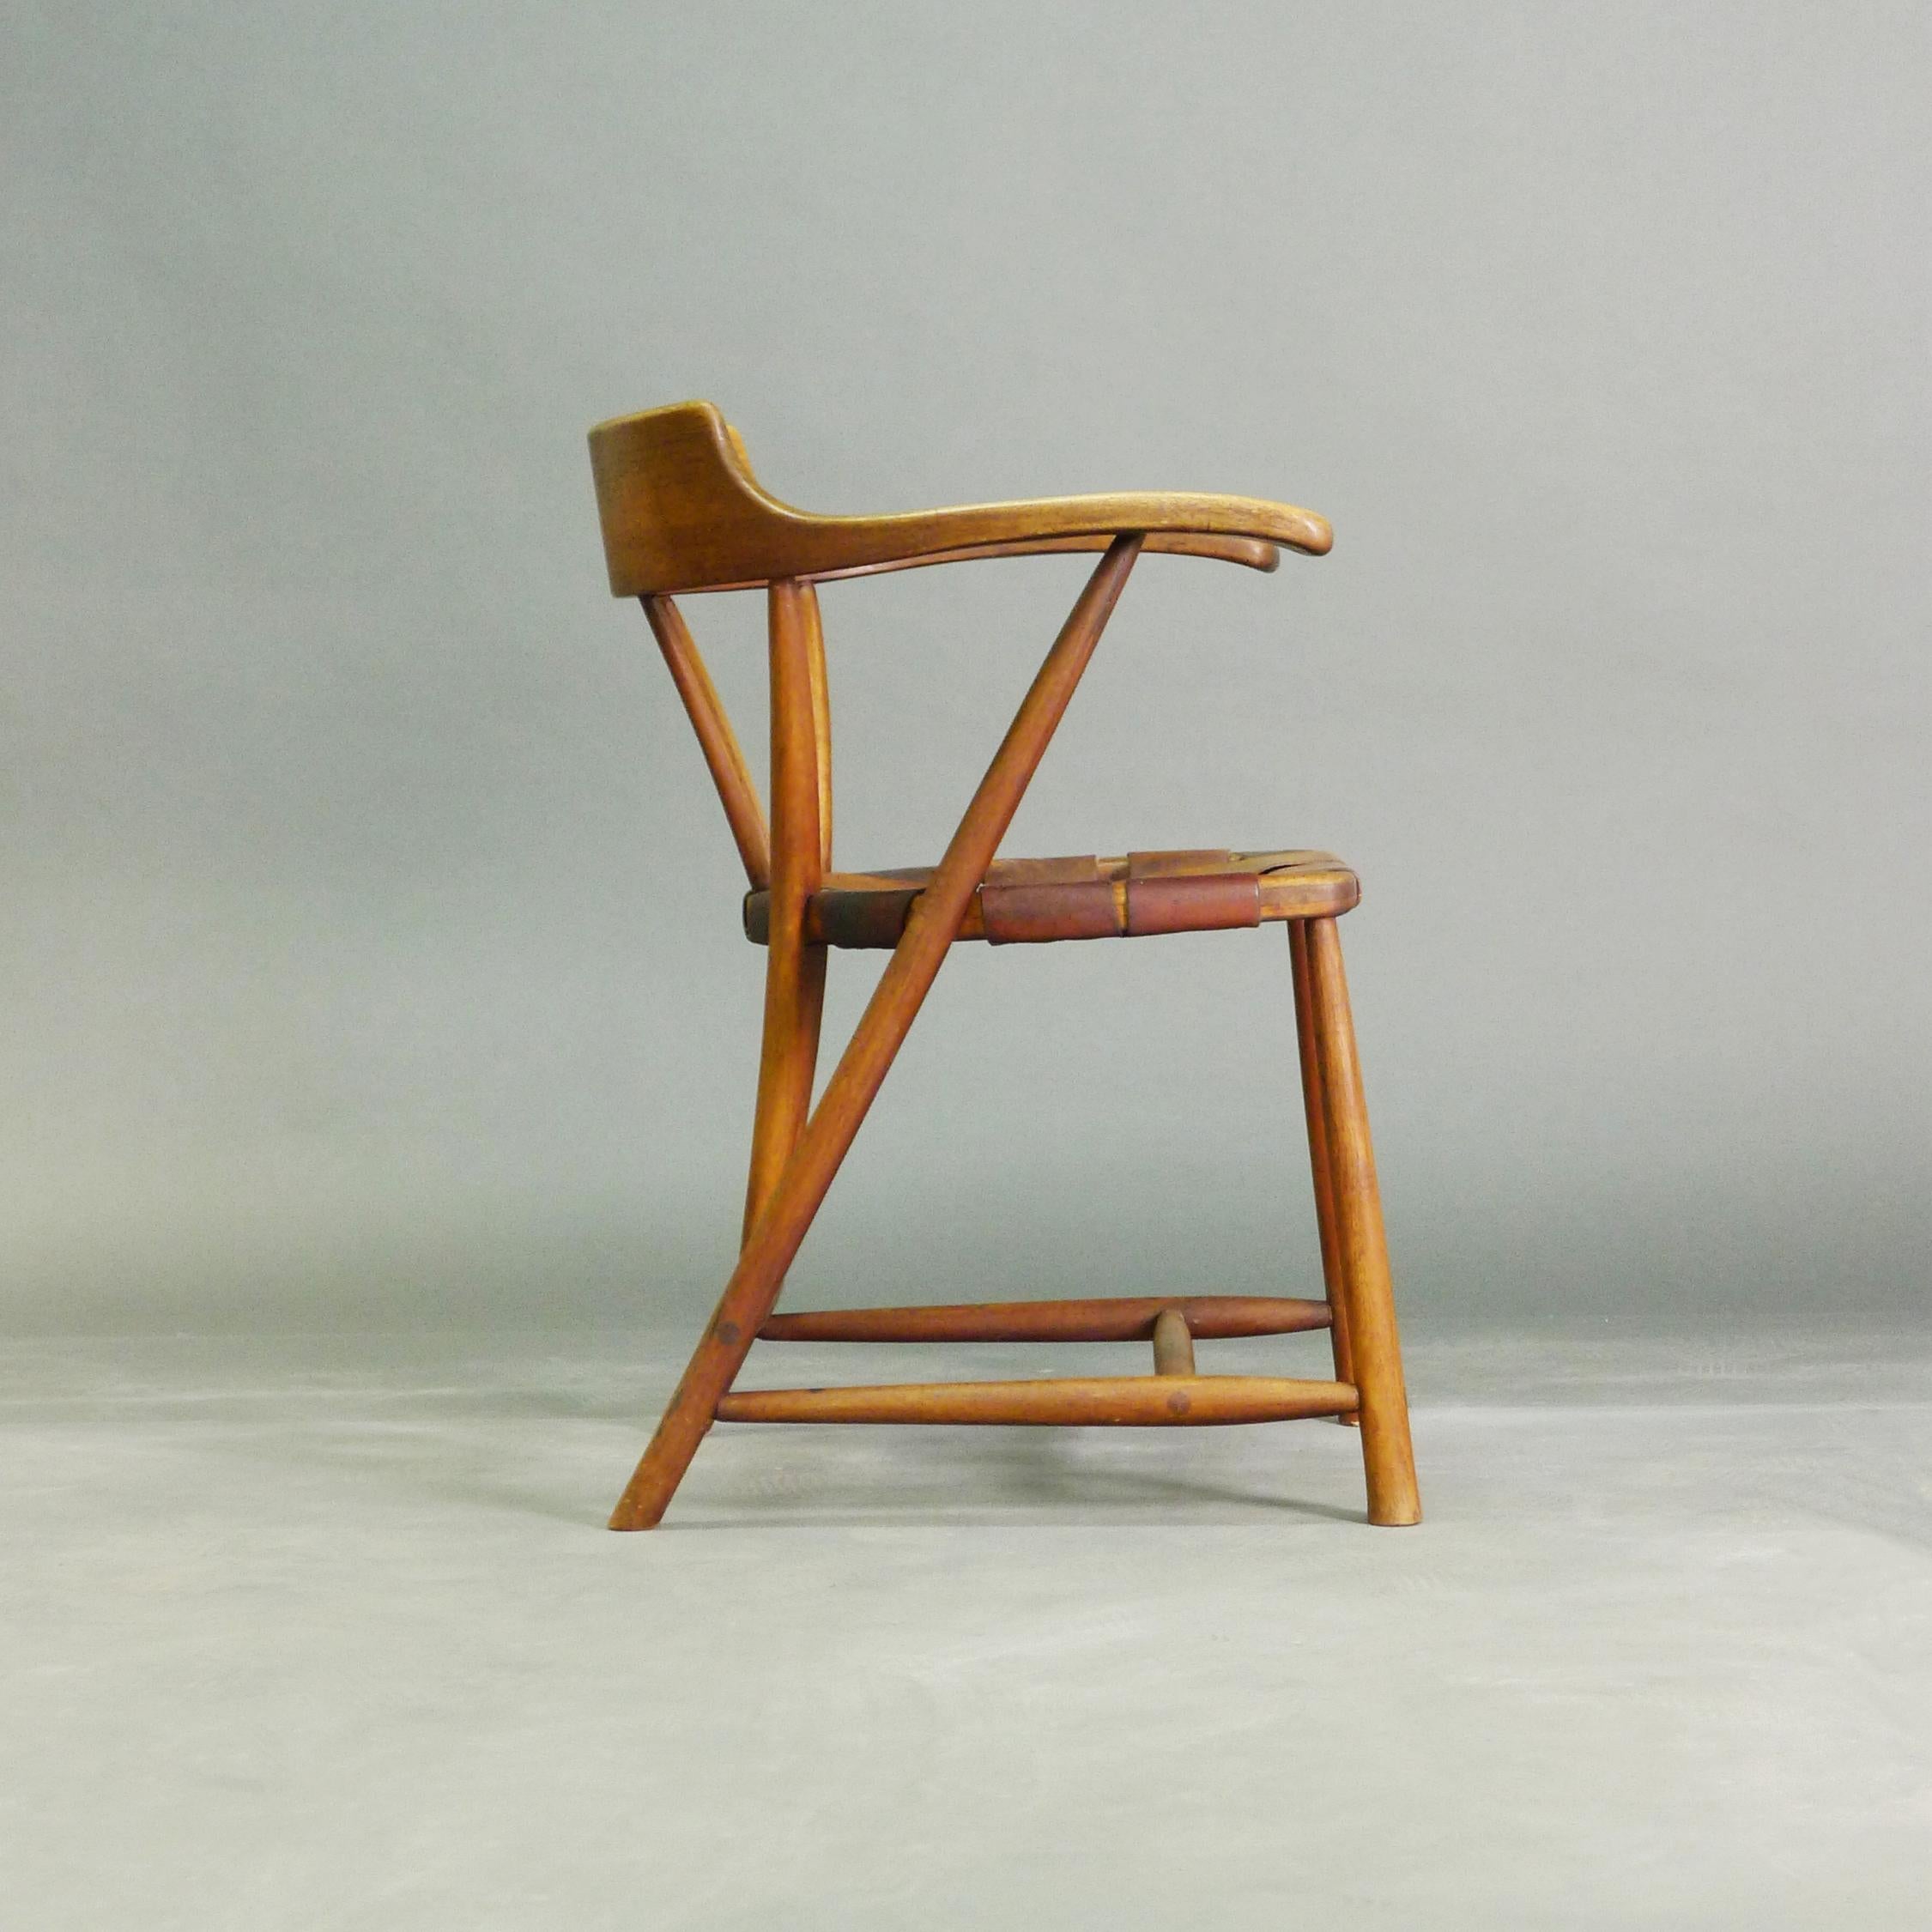 Wharton Esherick, Captains Chair, walnut and leather, initialled and dated 1951 For Sale 1